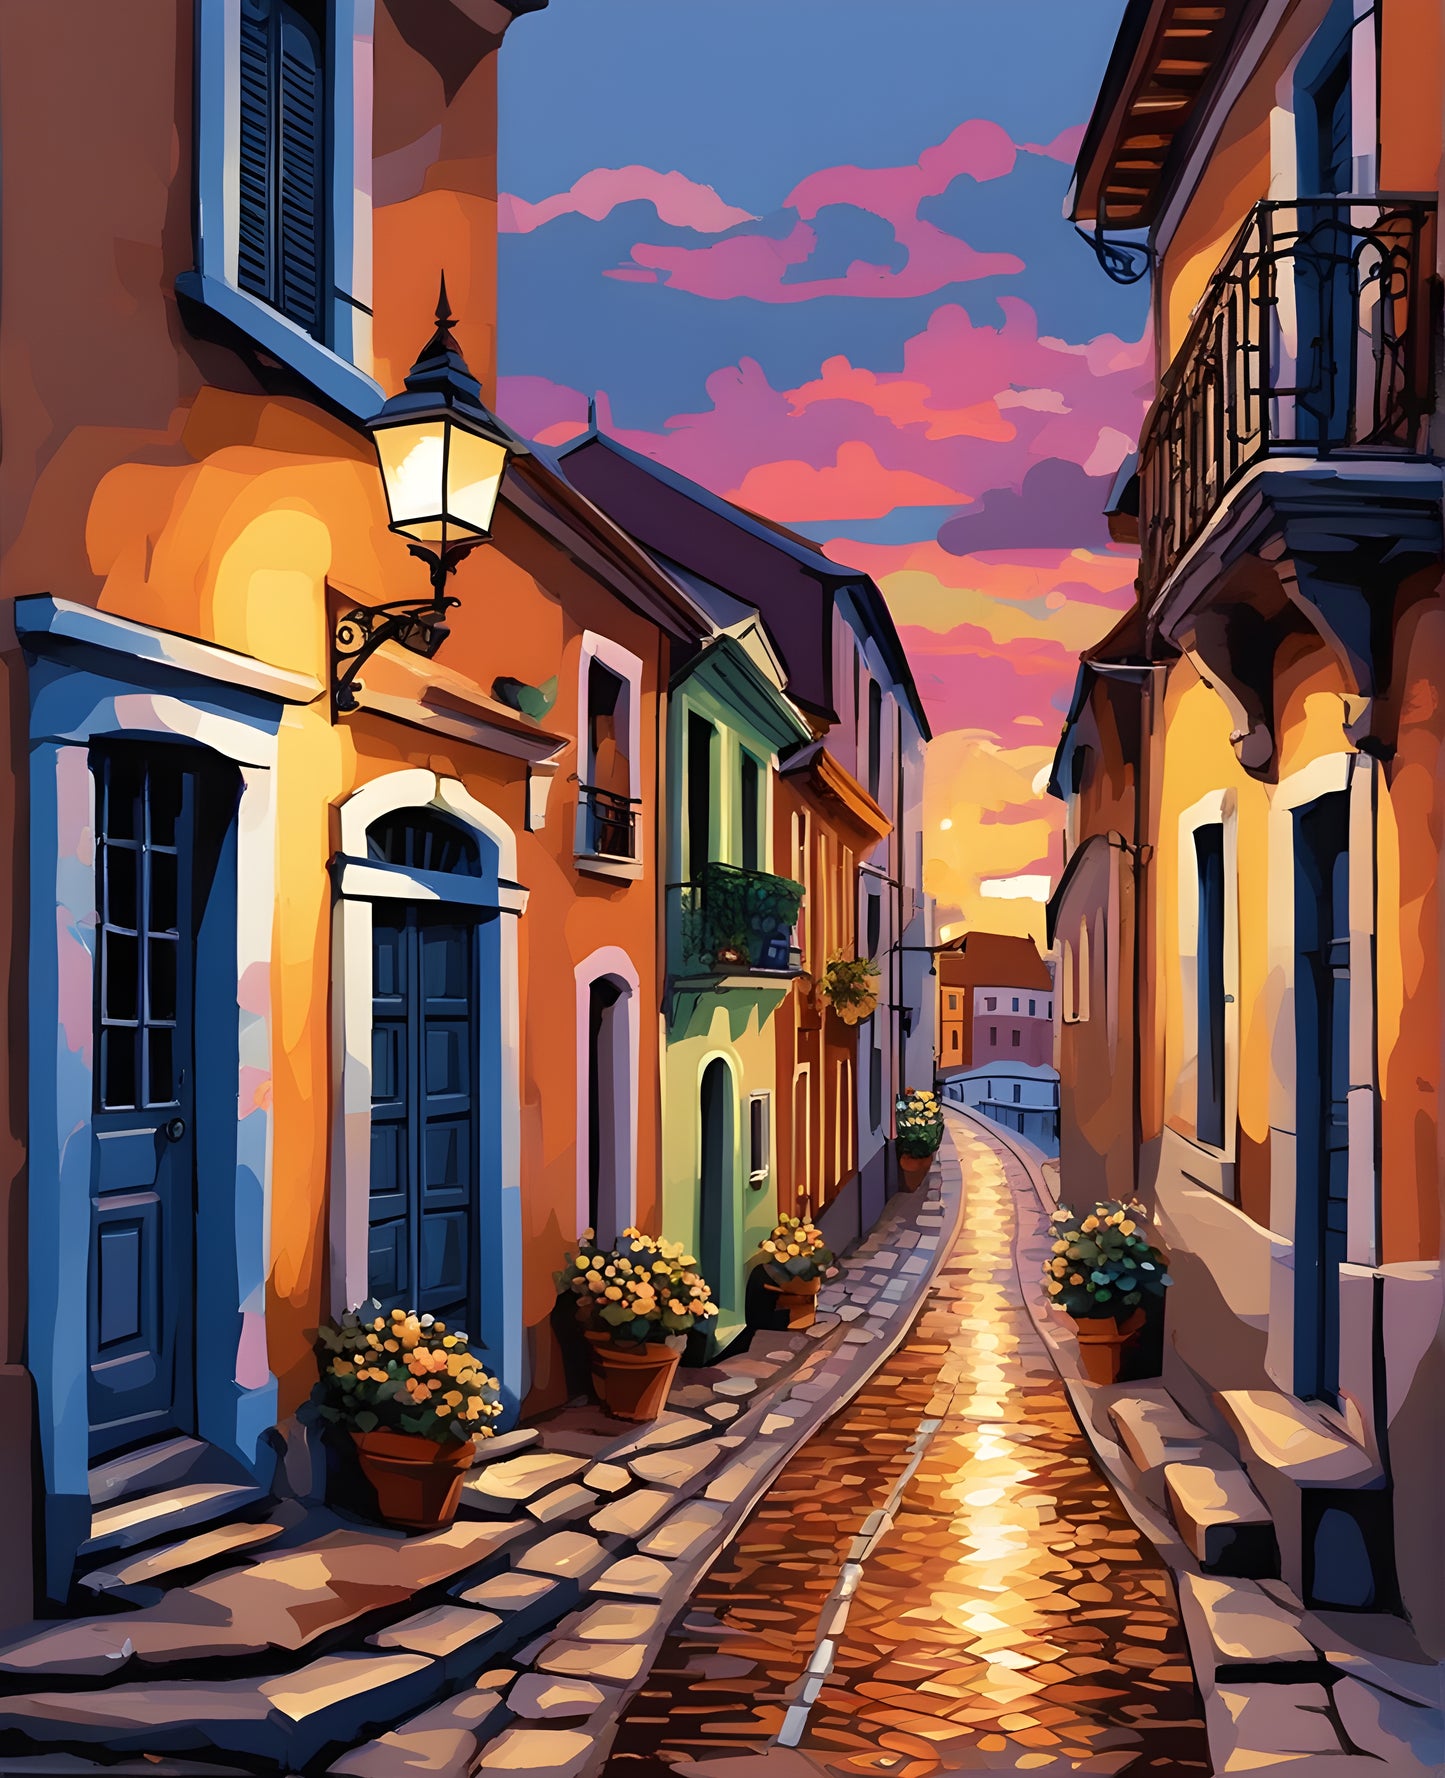 A European street at twilight - Van-Go Paint-By-Number Kit